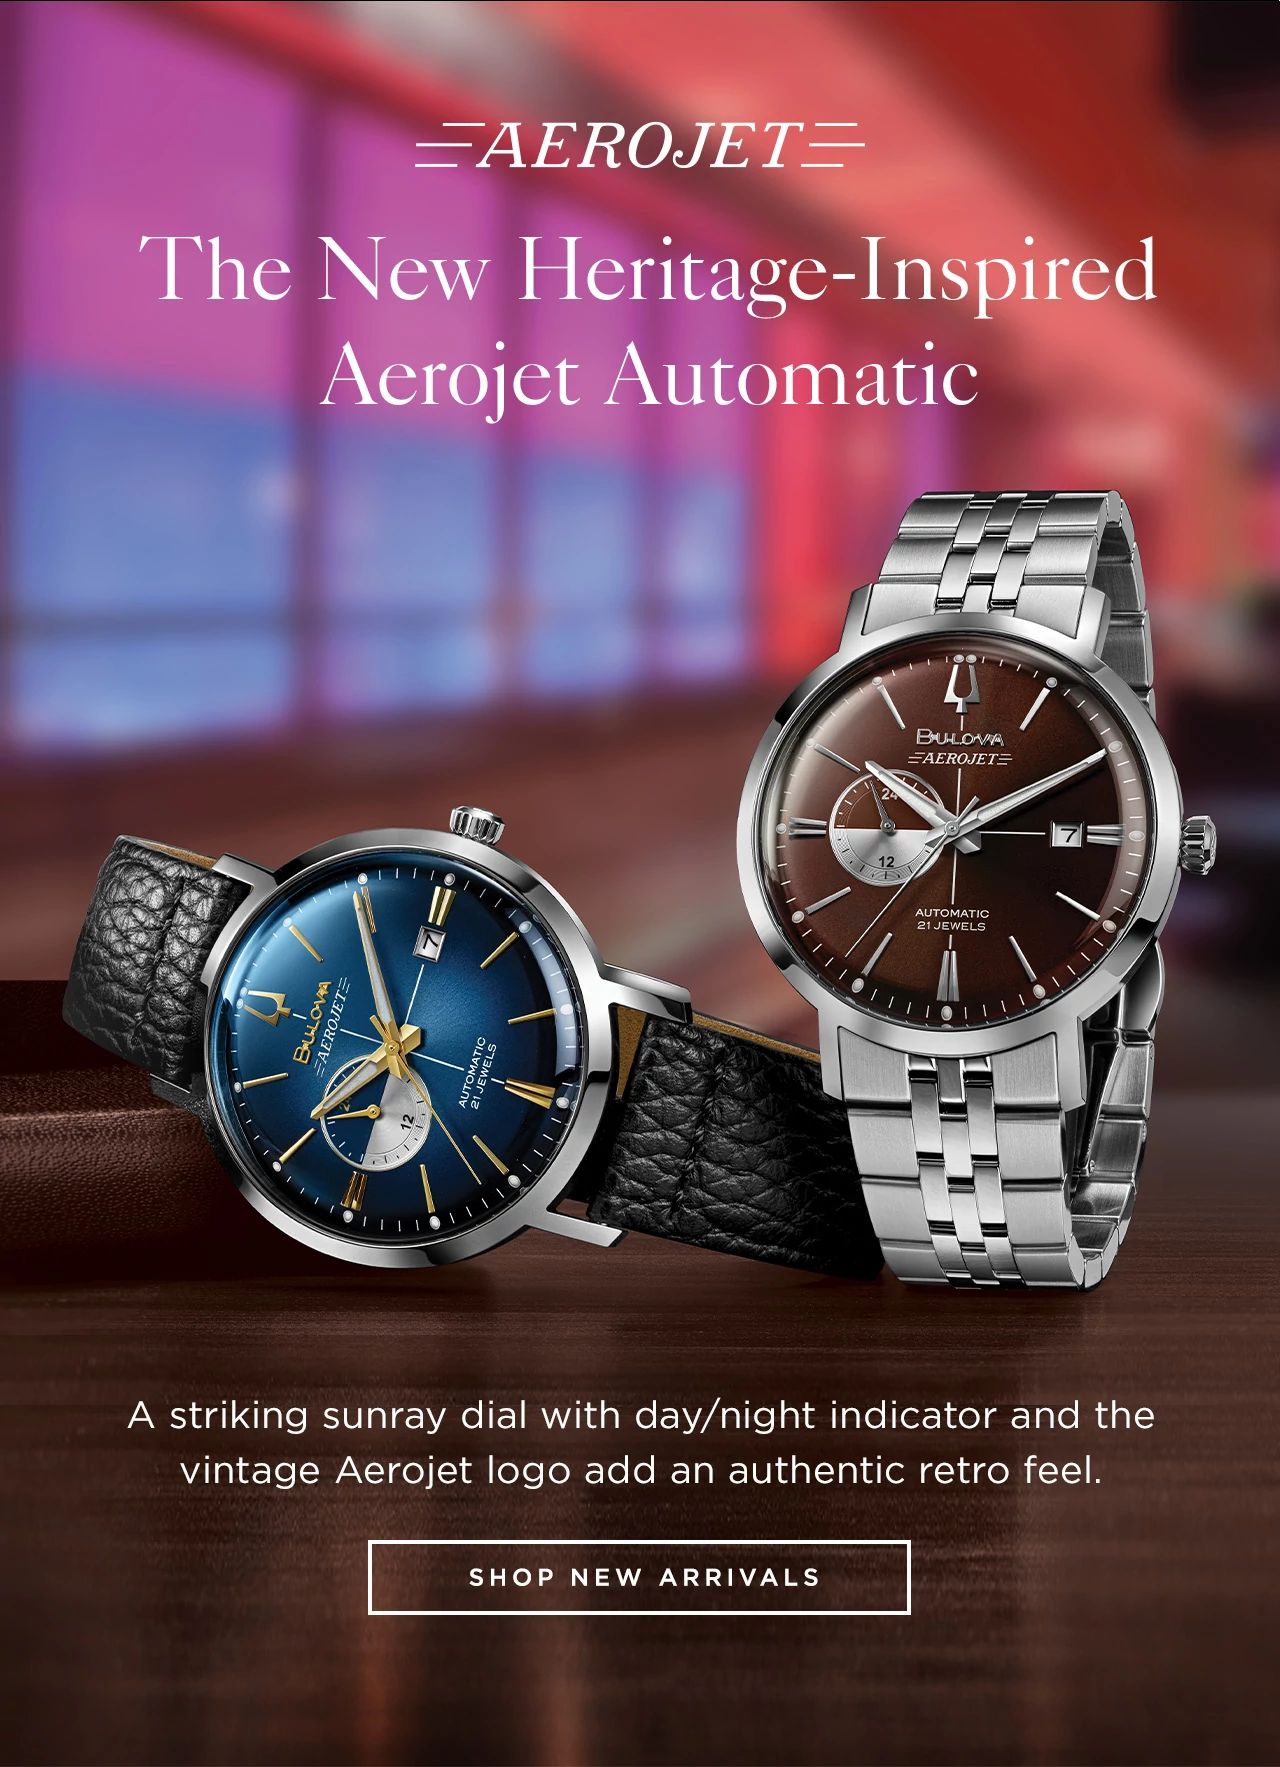 The New Heritage-Inspired Aerojet Automatic: A striking sunray dial with day/night indicator and the vintage Aerojet logo adds an authentic retro feel.